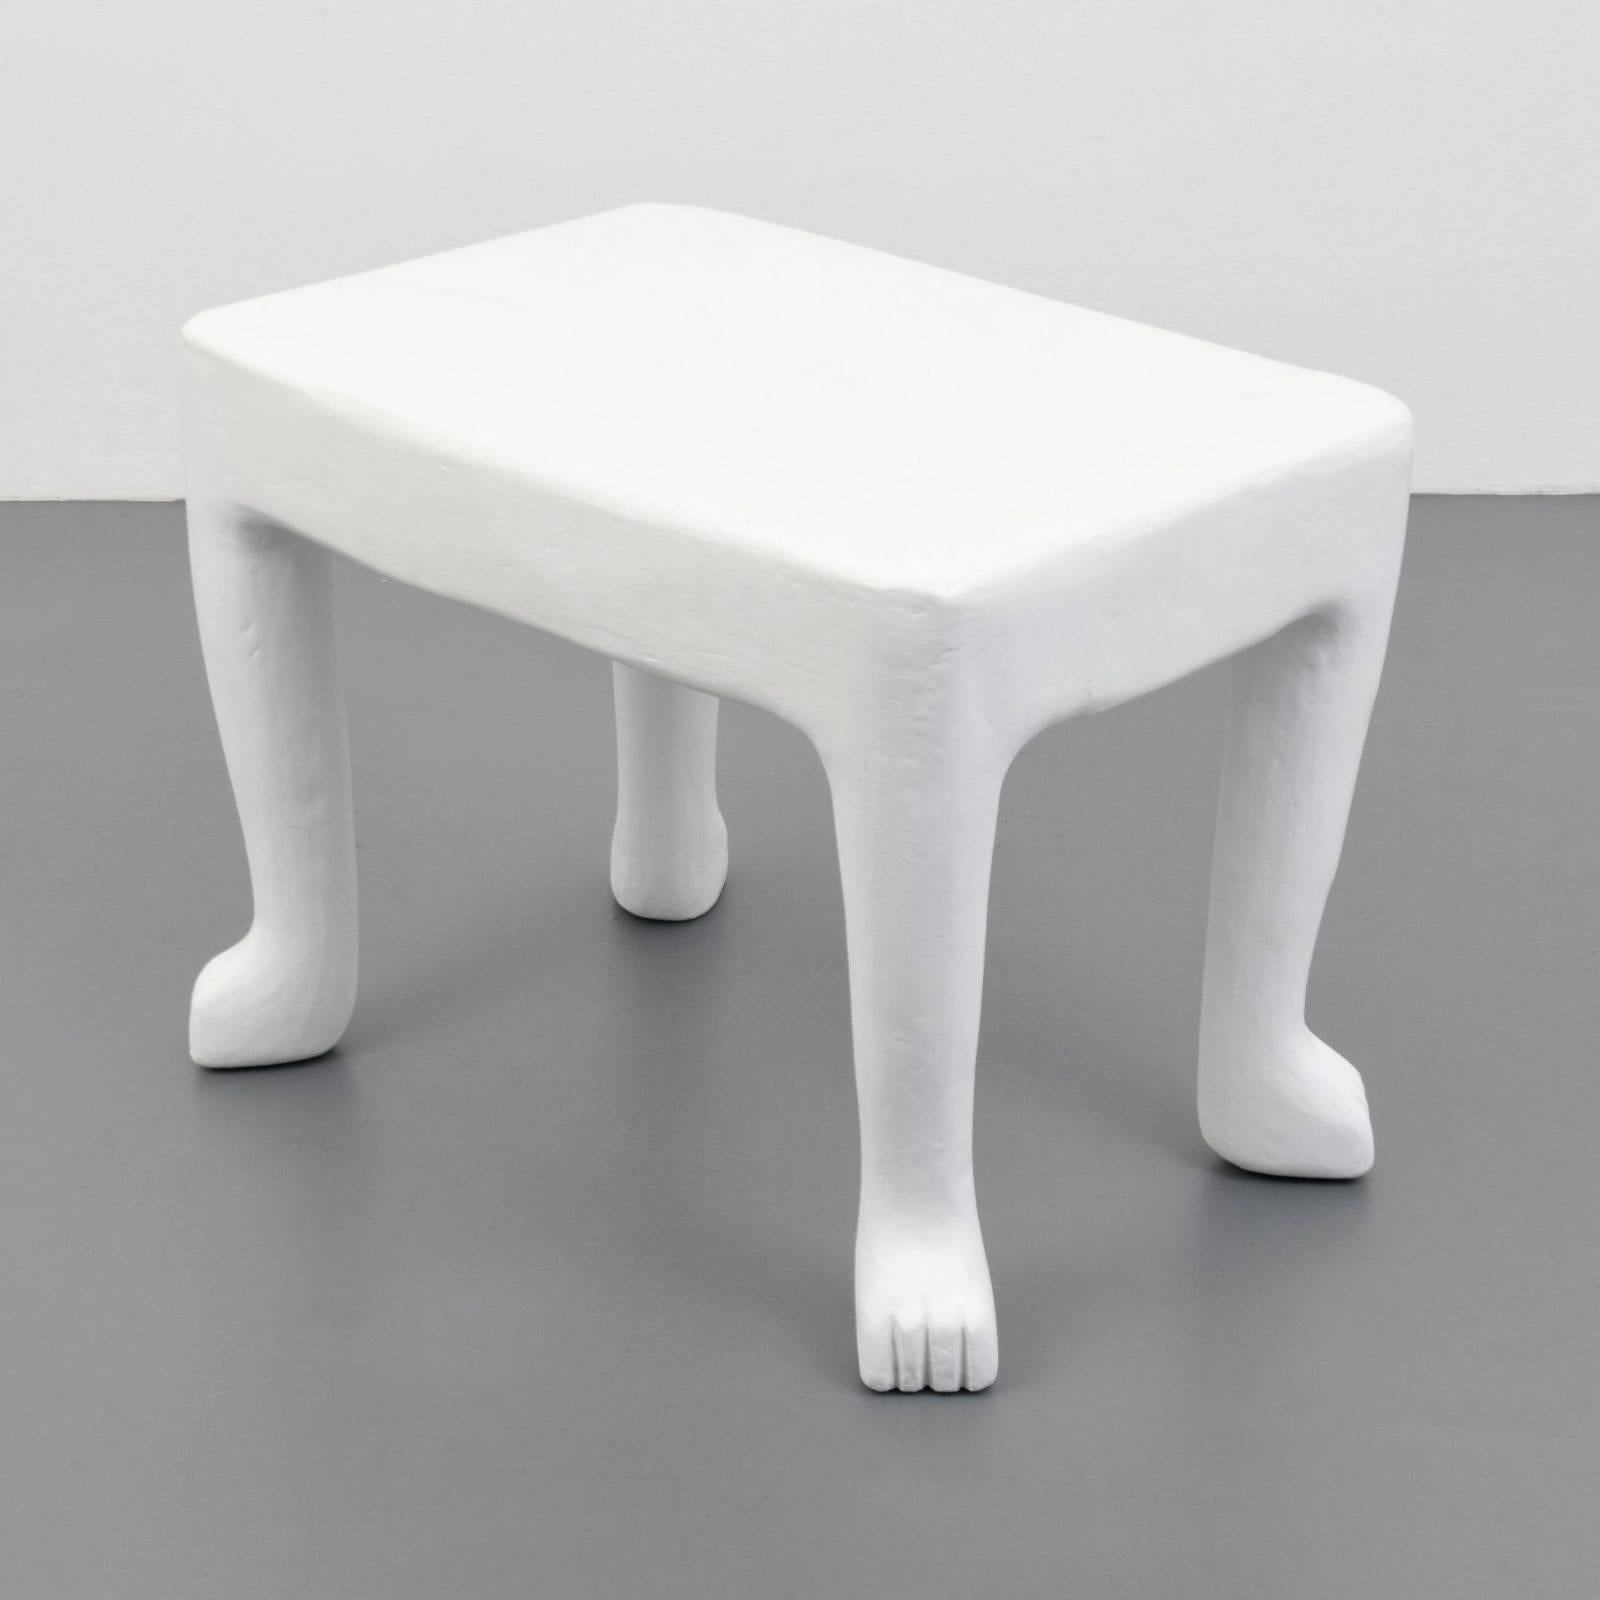 John Dickinson Square “African” Plaster End-Table, USA, c. 1976-1980